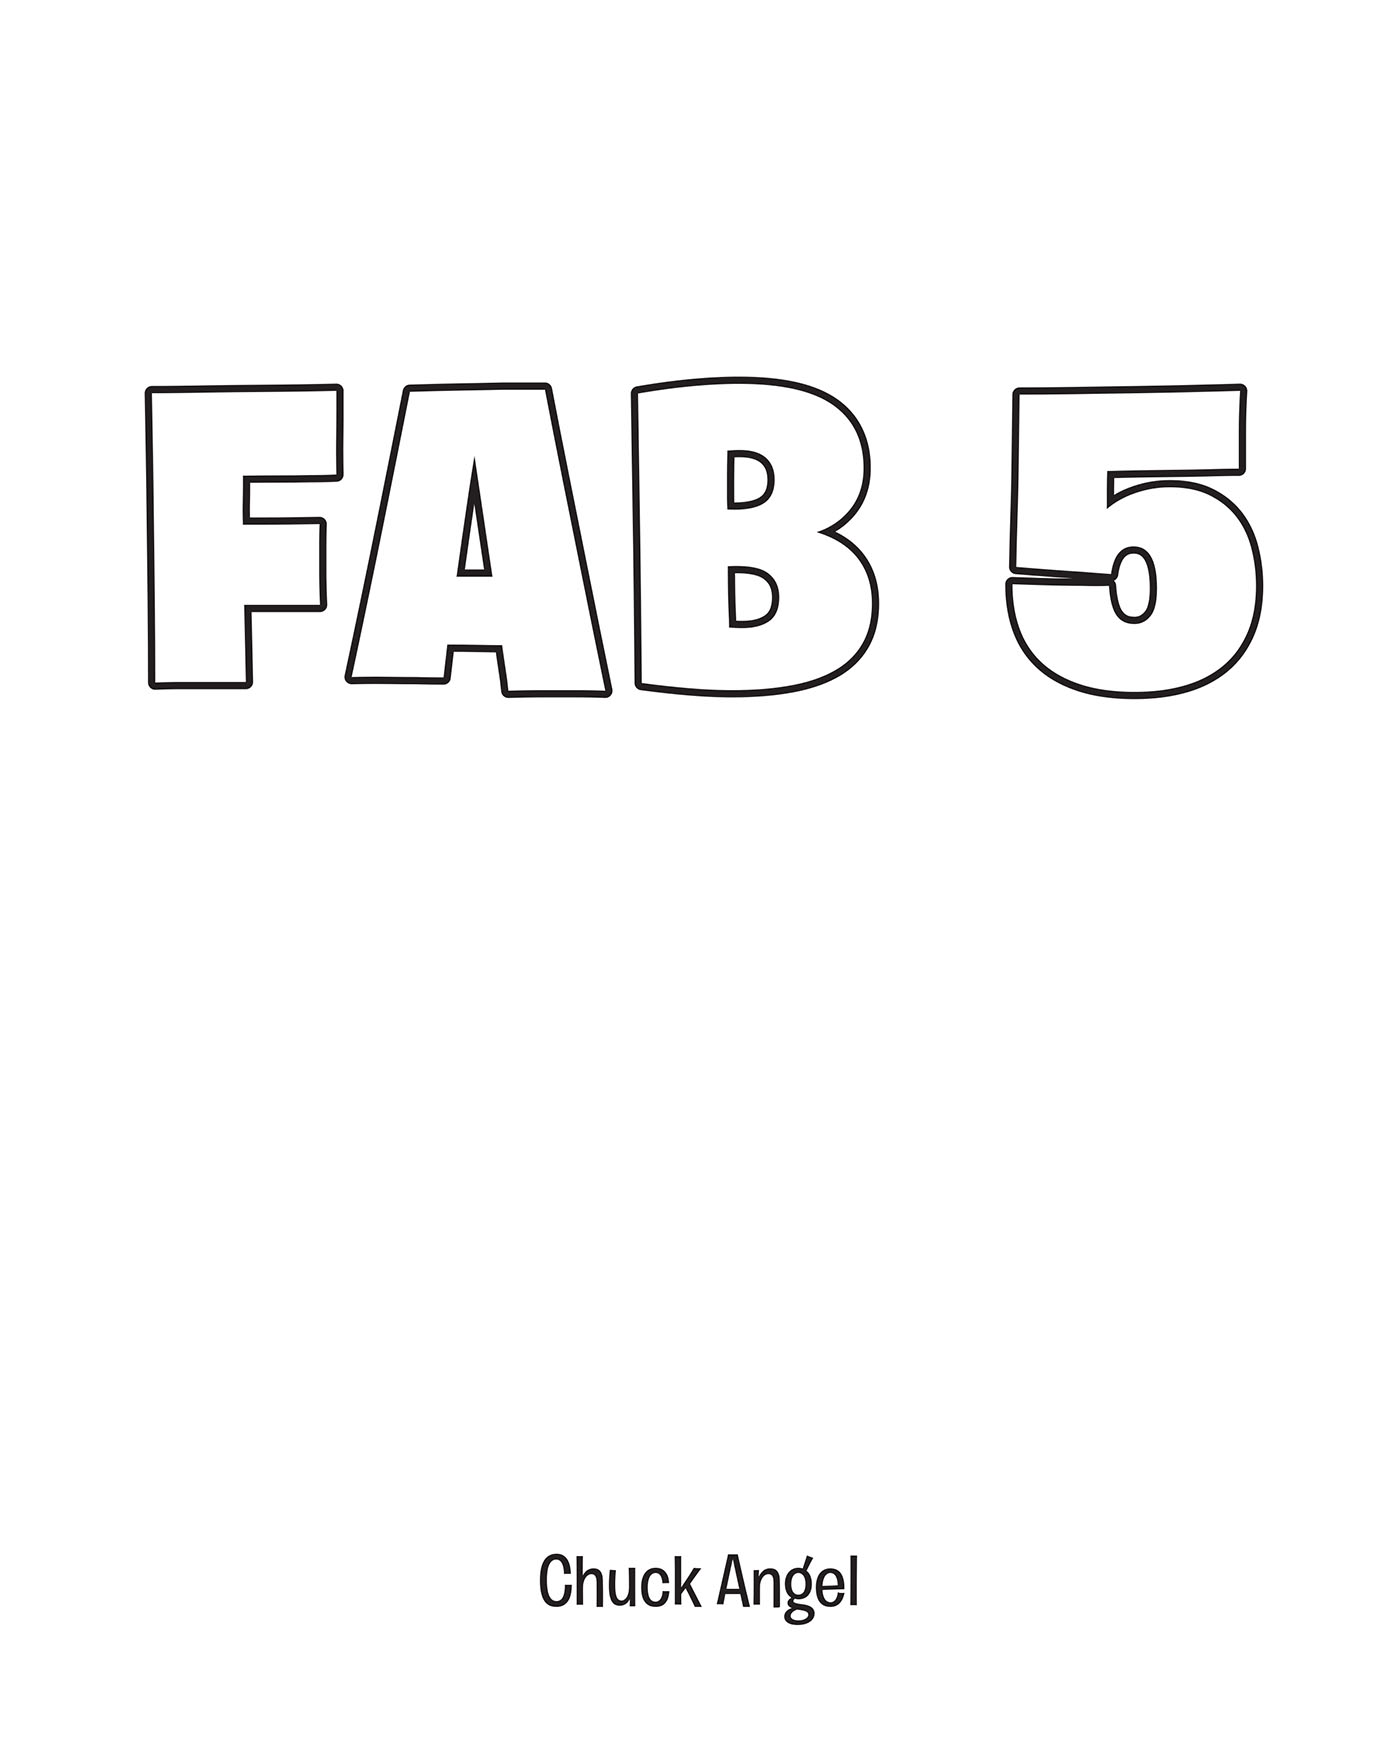 Chuck Angel’s Newly Released "Fab 5" is an Exciting Tale of Superheroes on a Mission to Protect the Natural World